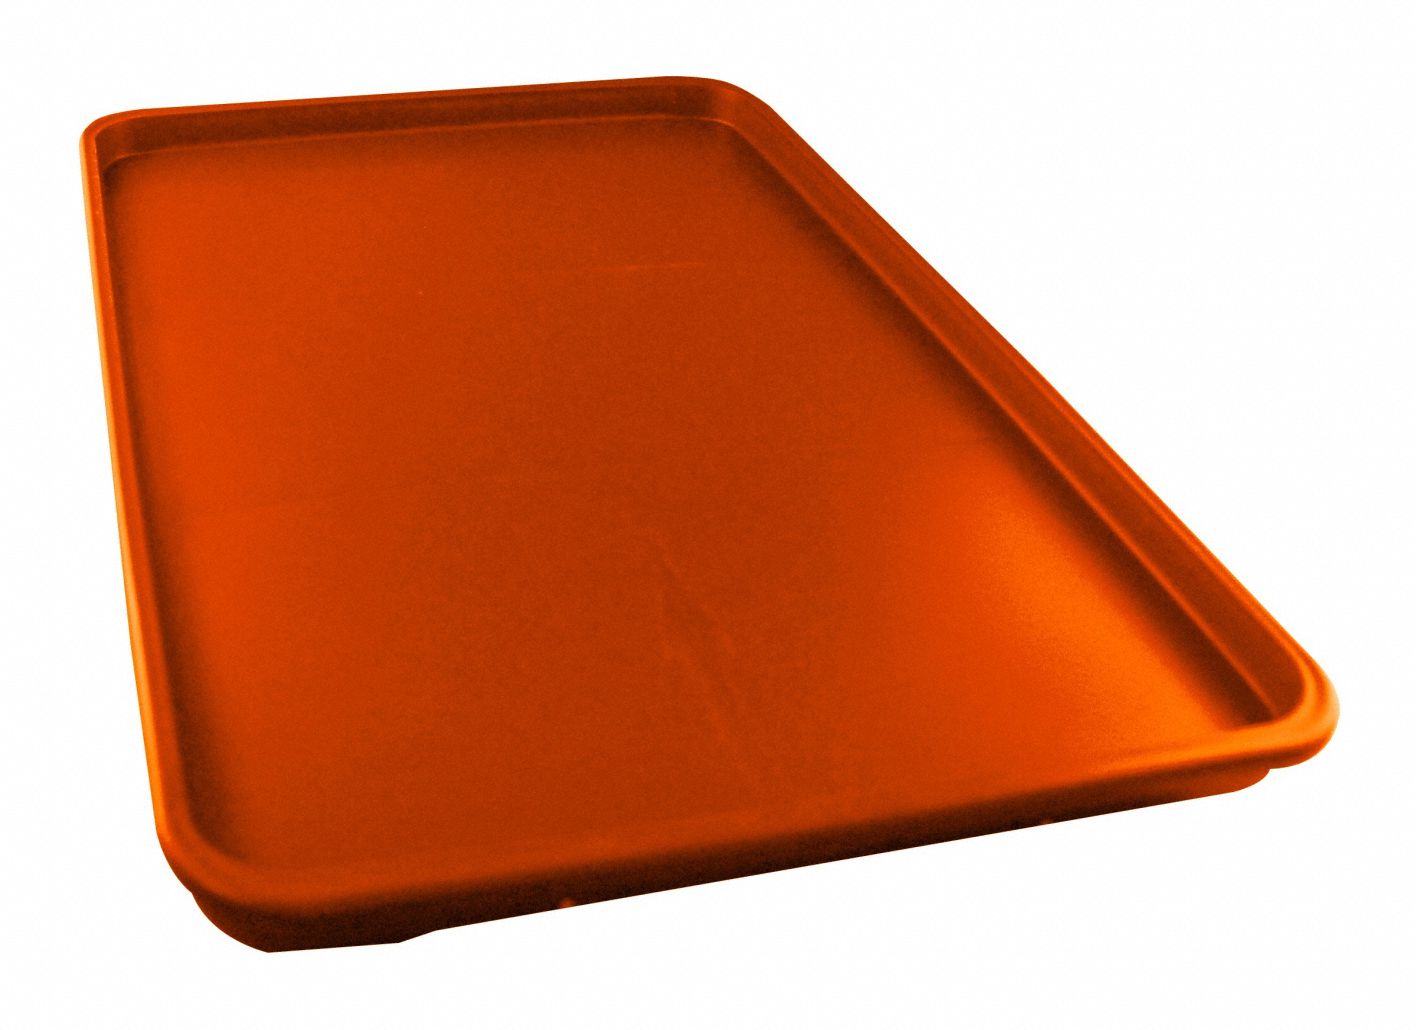 Rock Food Tray Lid Orange: w/ Compartments, 1 1/4 in Overall Dp, Orange, Polypropylene, 10 PK